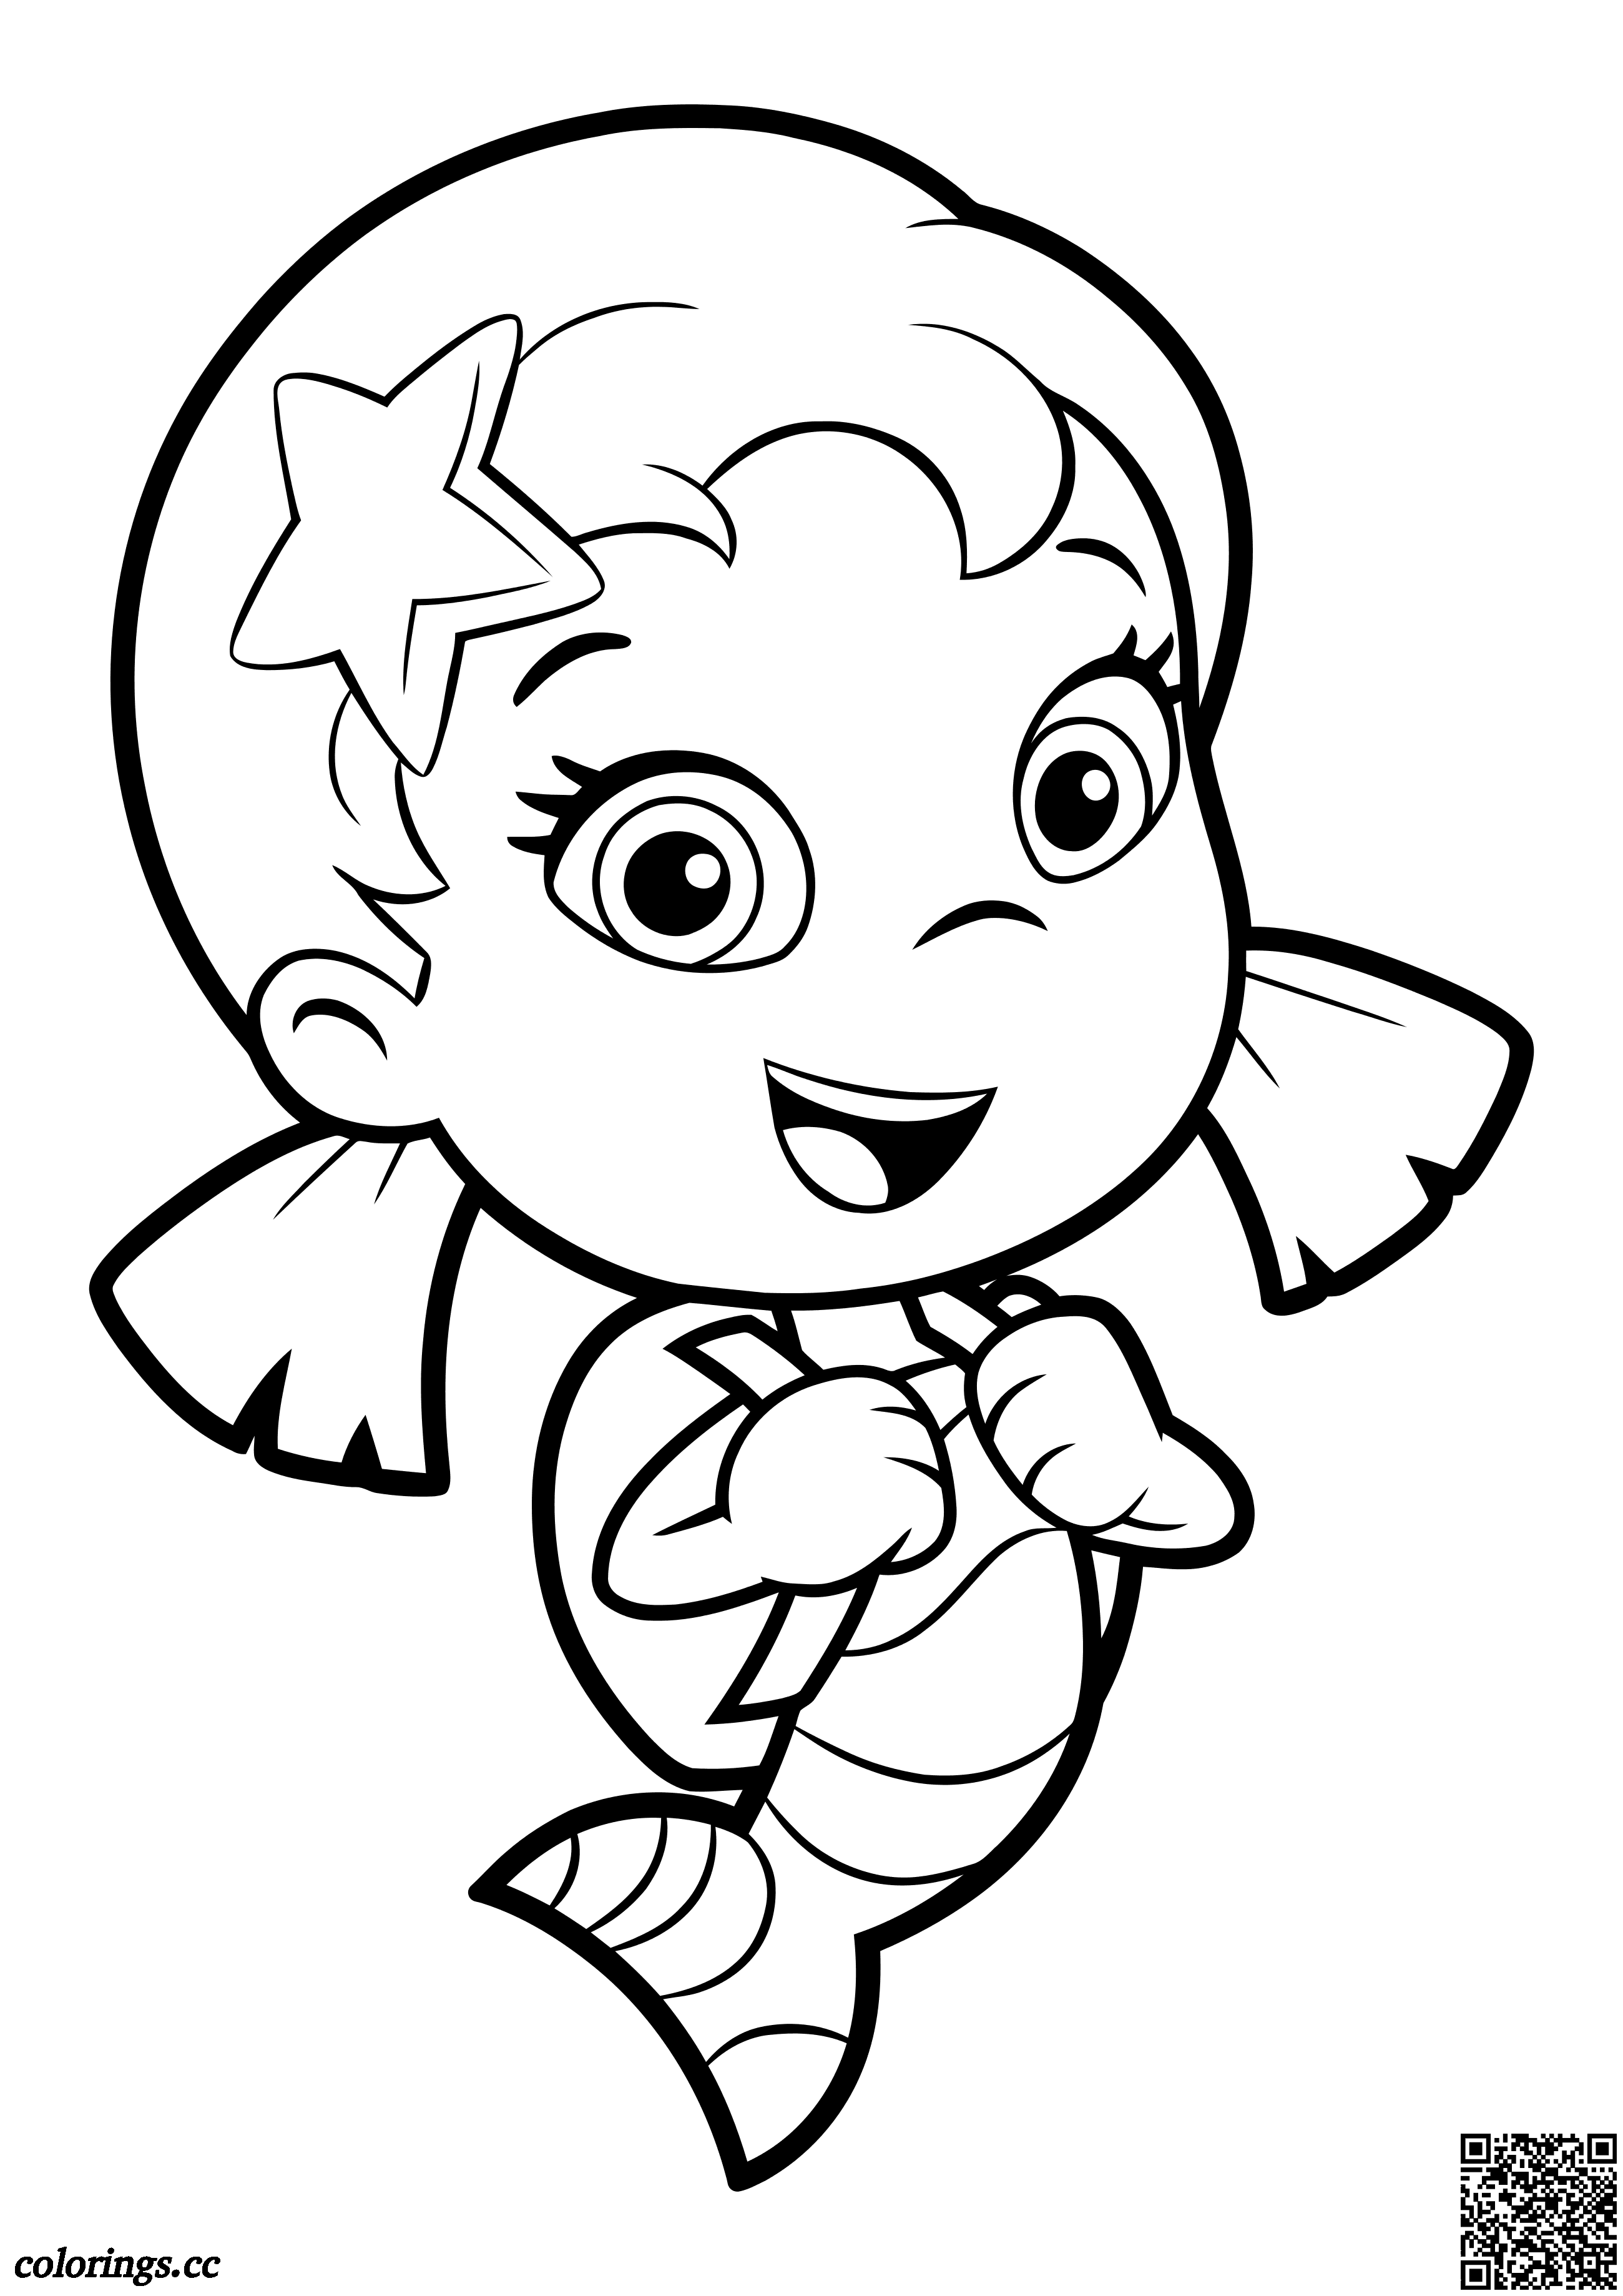 Oona with schoolbag coloring pages, Guppies and bubbles coloring ...